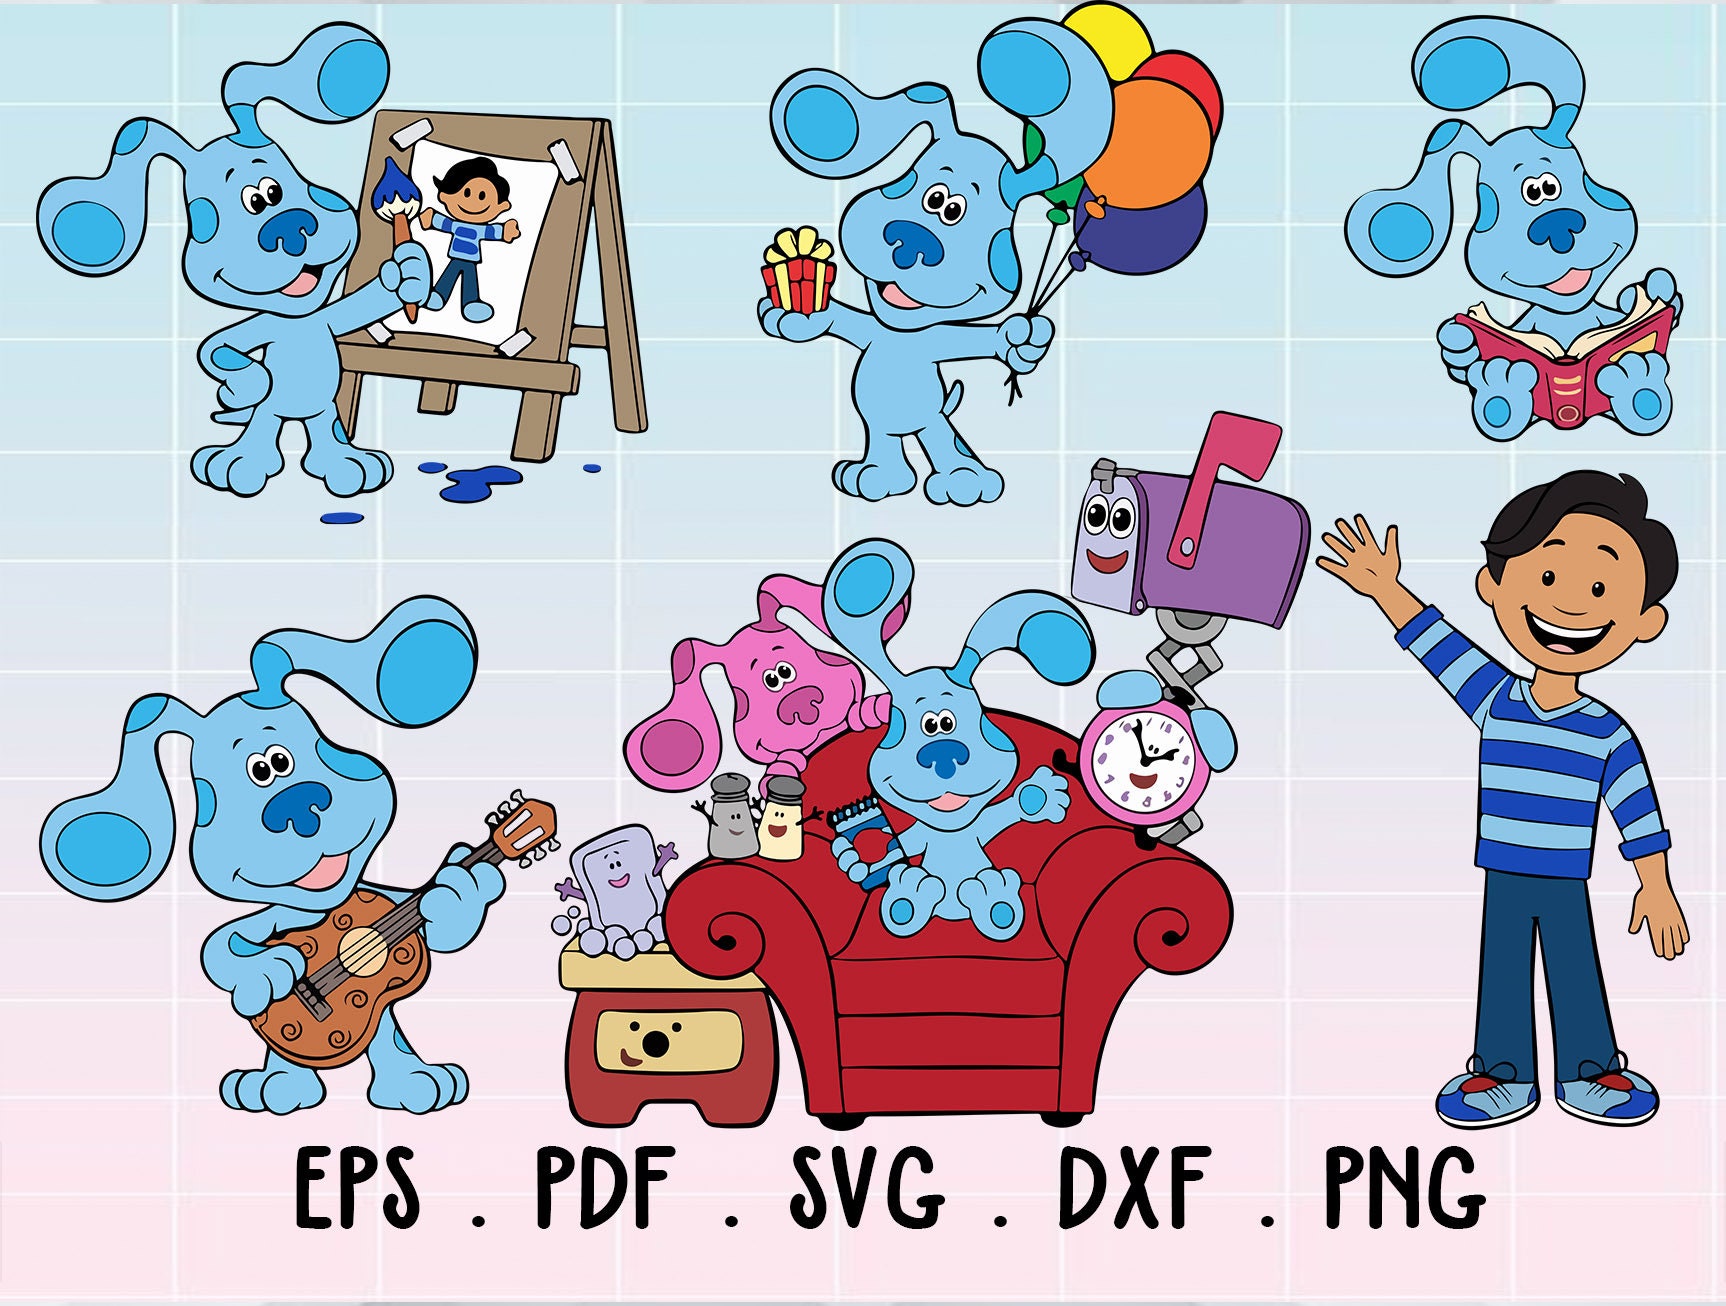 Download Blues Clues and You SVG Bundle 2blues clues and you party | Etsy